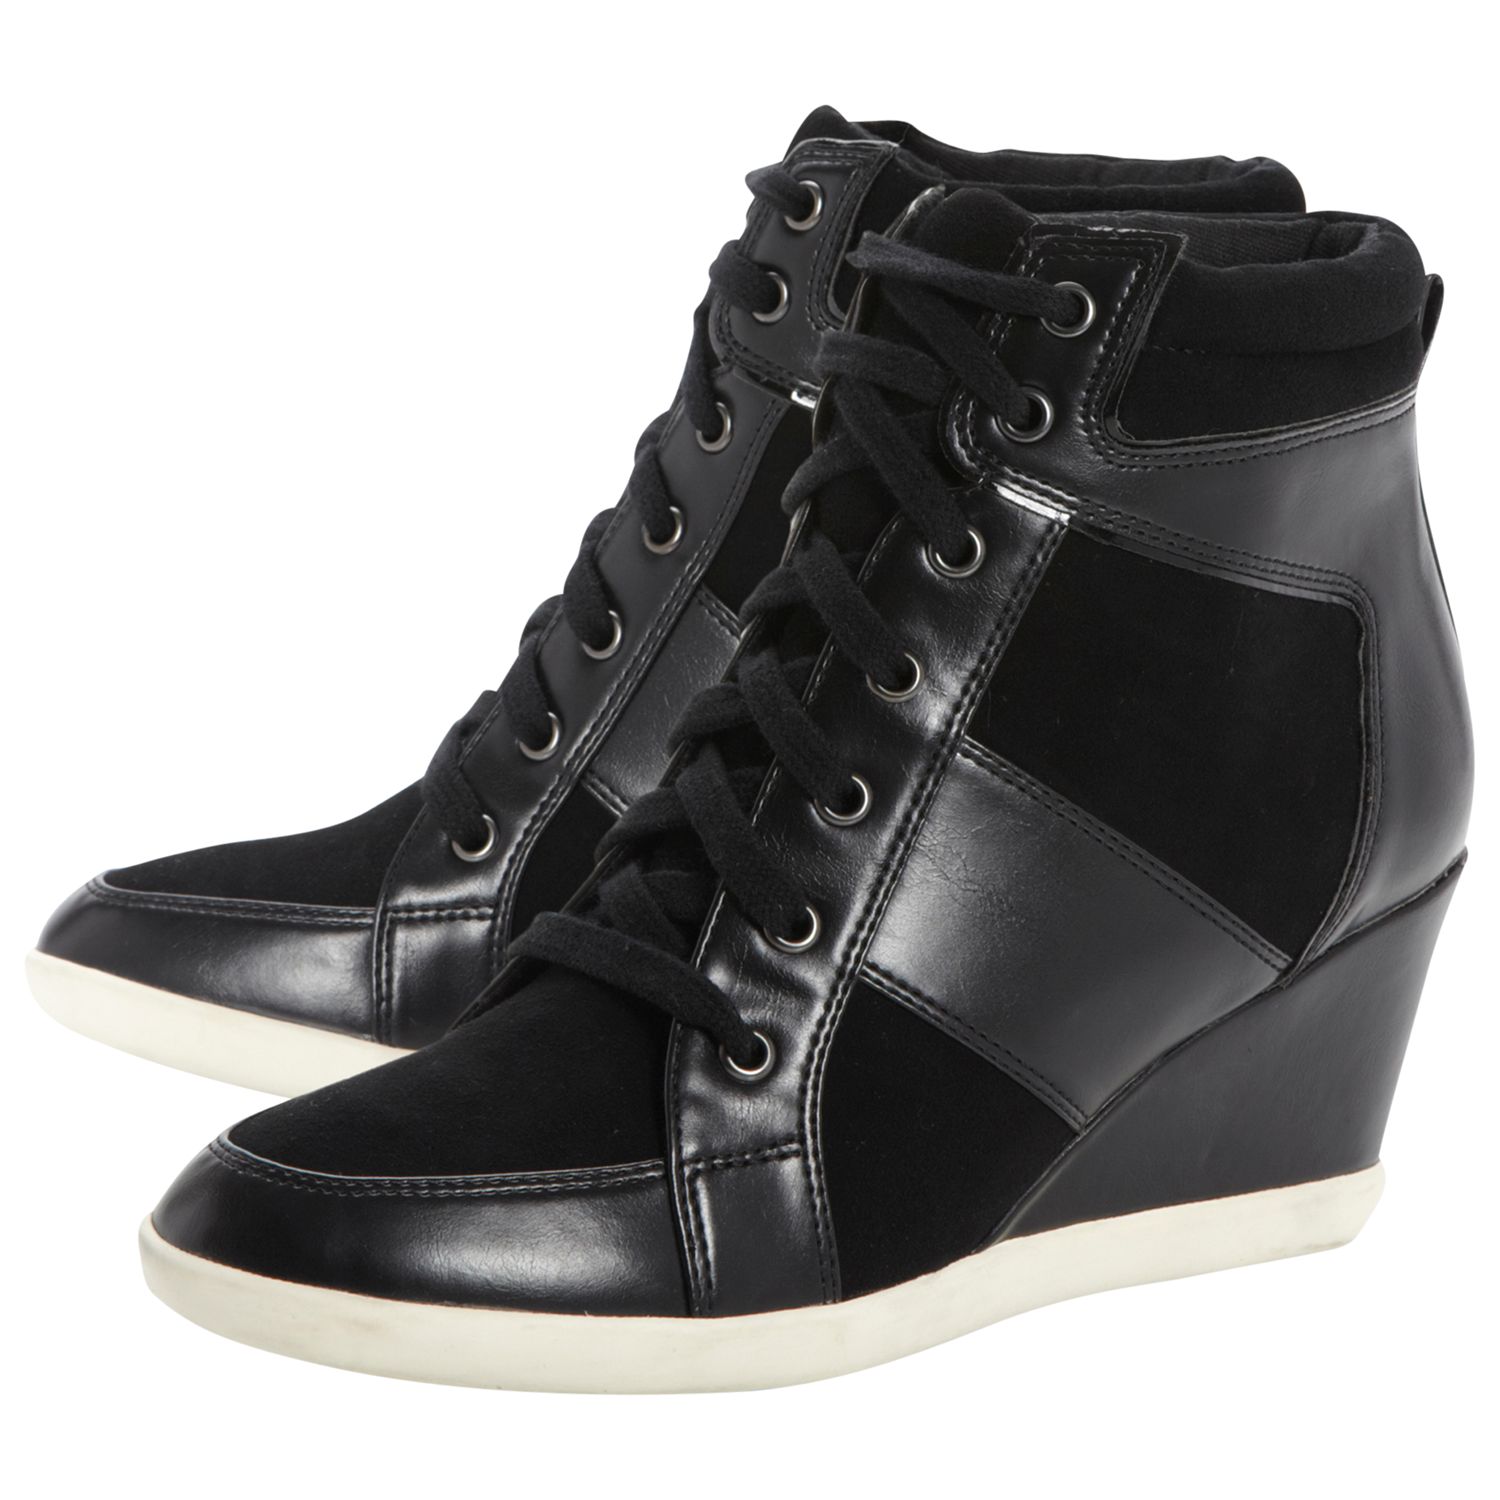 Buy Dune Lapin Suede and Leather Wedge Trainers, Black Online at ...